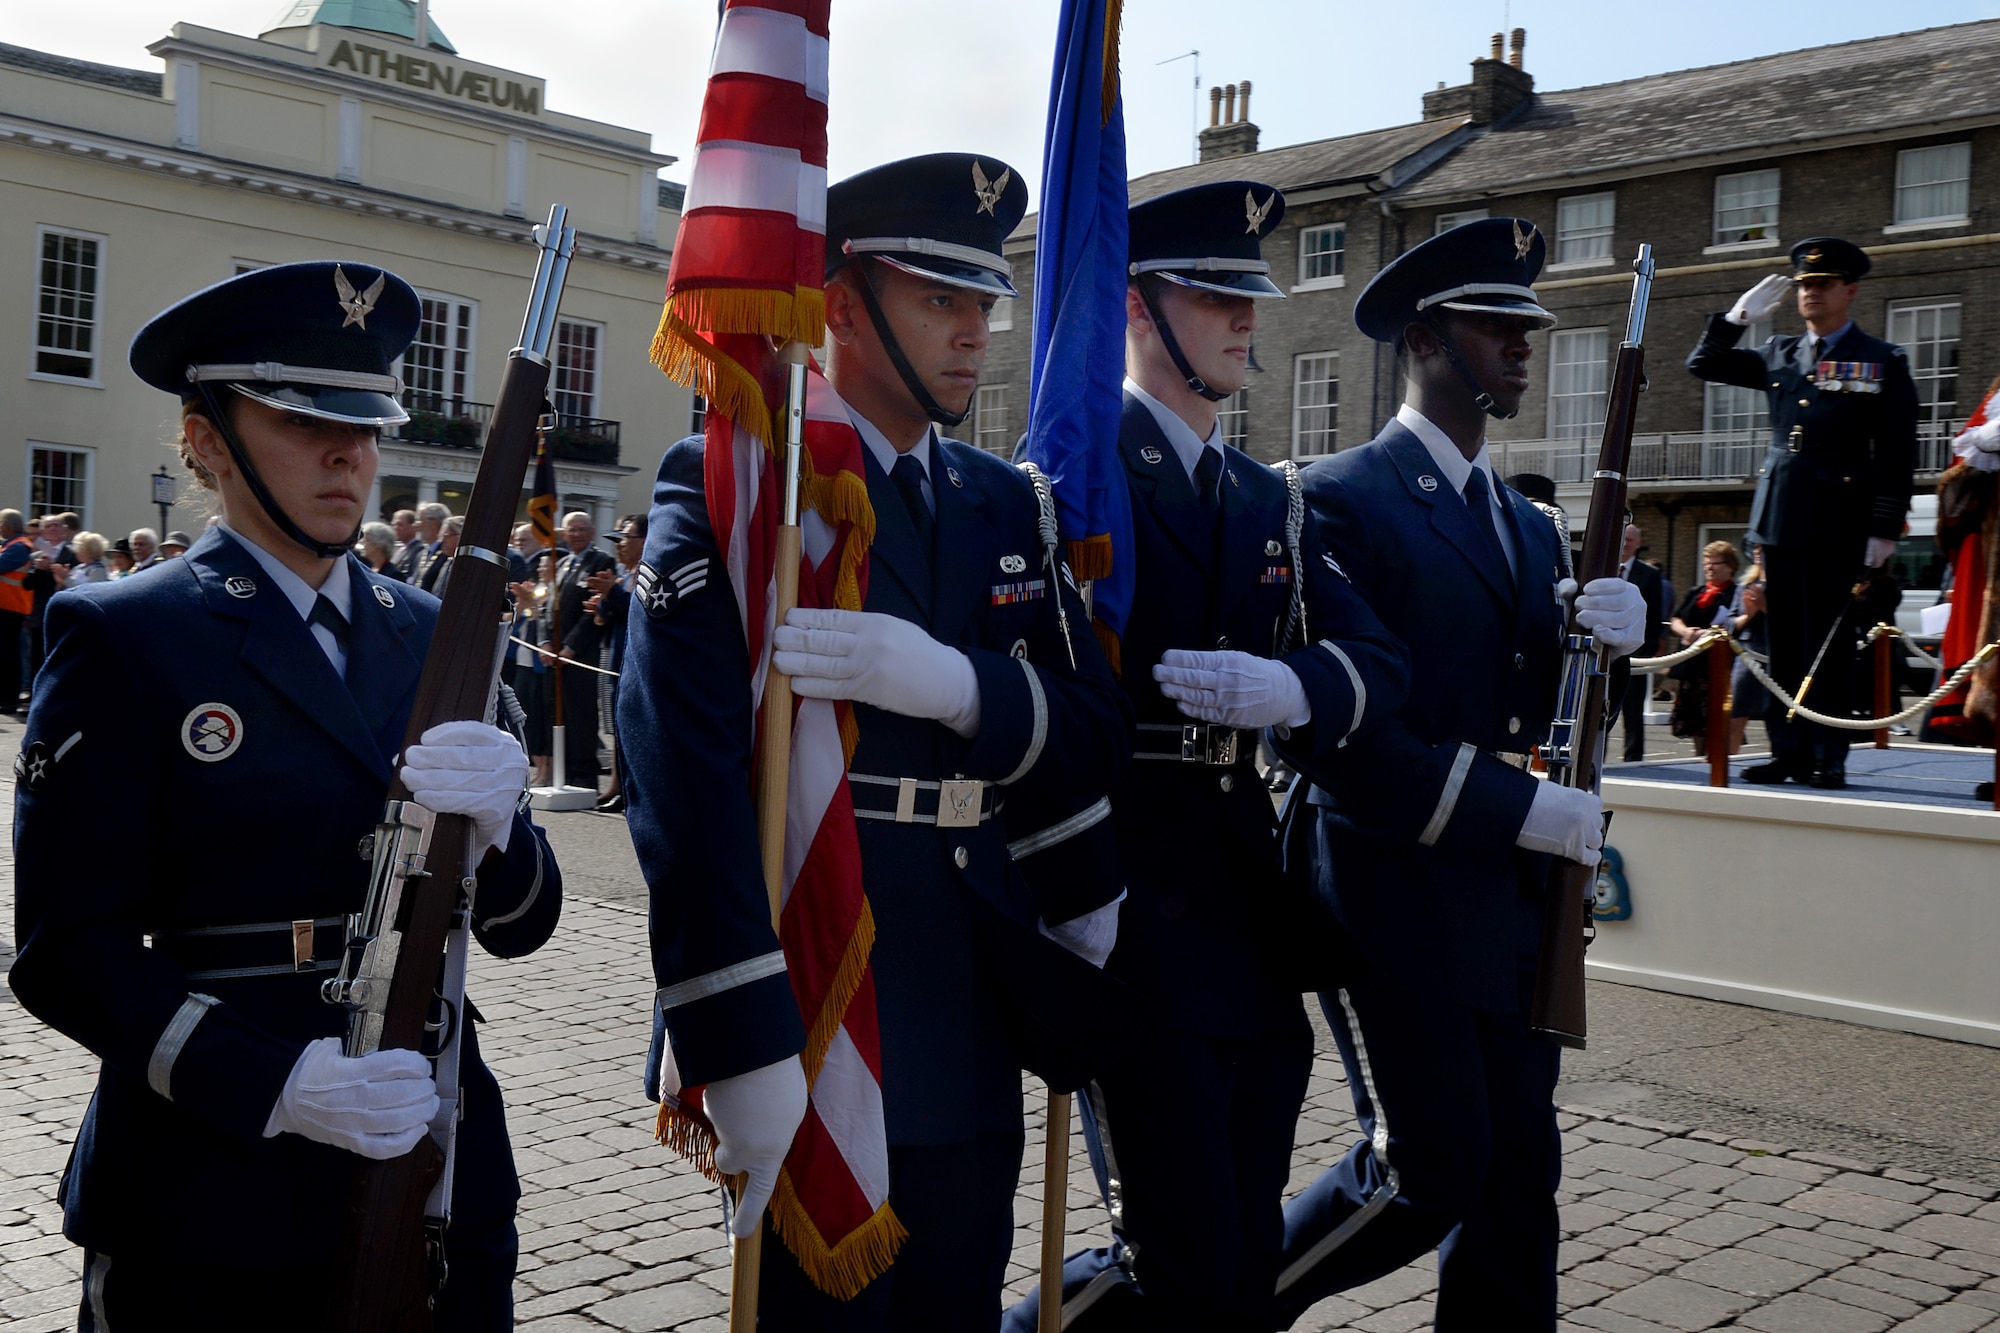 U.S. Air Force honor guard members march during the Battle of Britain parade Sept. 19, 2016, in Bury St. Edmunds, England. The Battle of Britain parade participants started the march out of the Abbey Gardens, followed the route along Angel Hill to St. Mary’s Church then ended back in the gardens. (U.S. Air Force photo by Airman 1st Class Tenley Long)